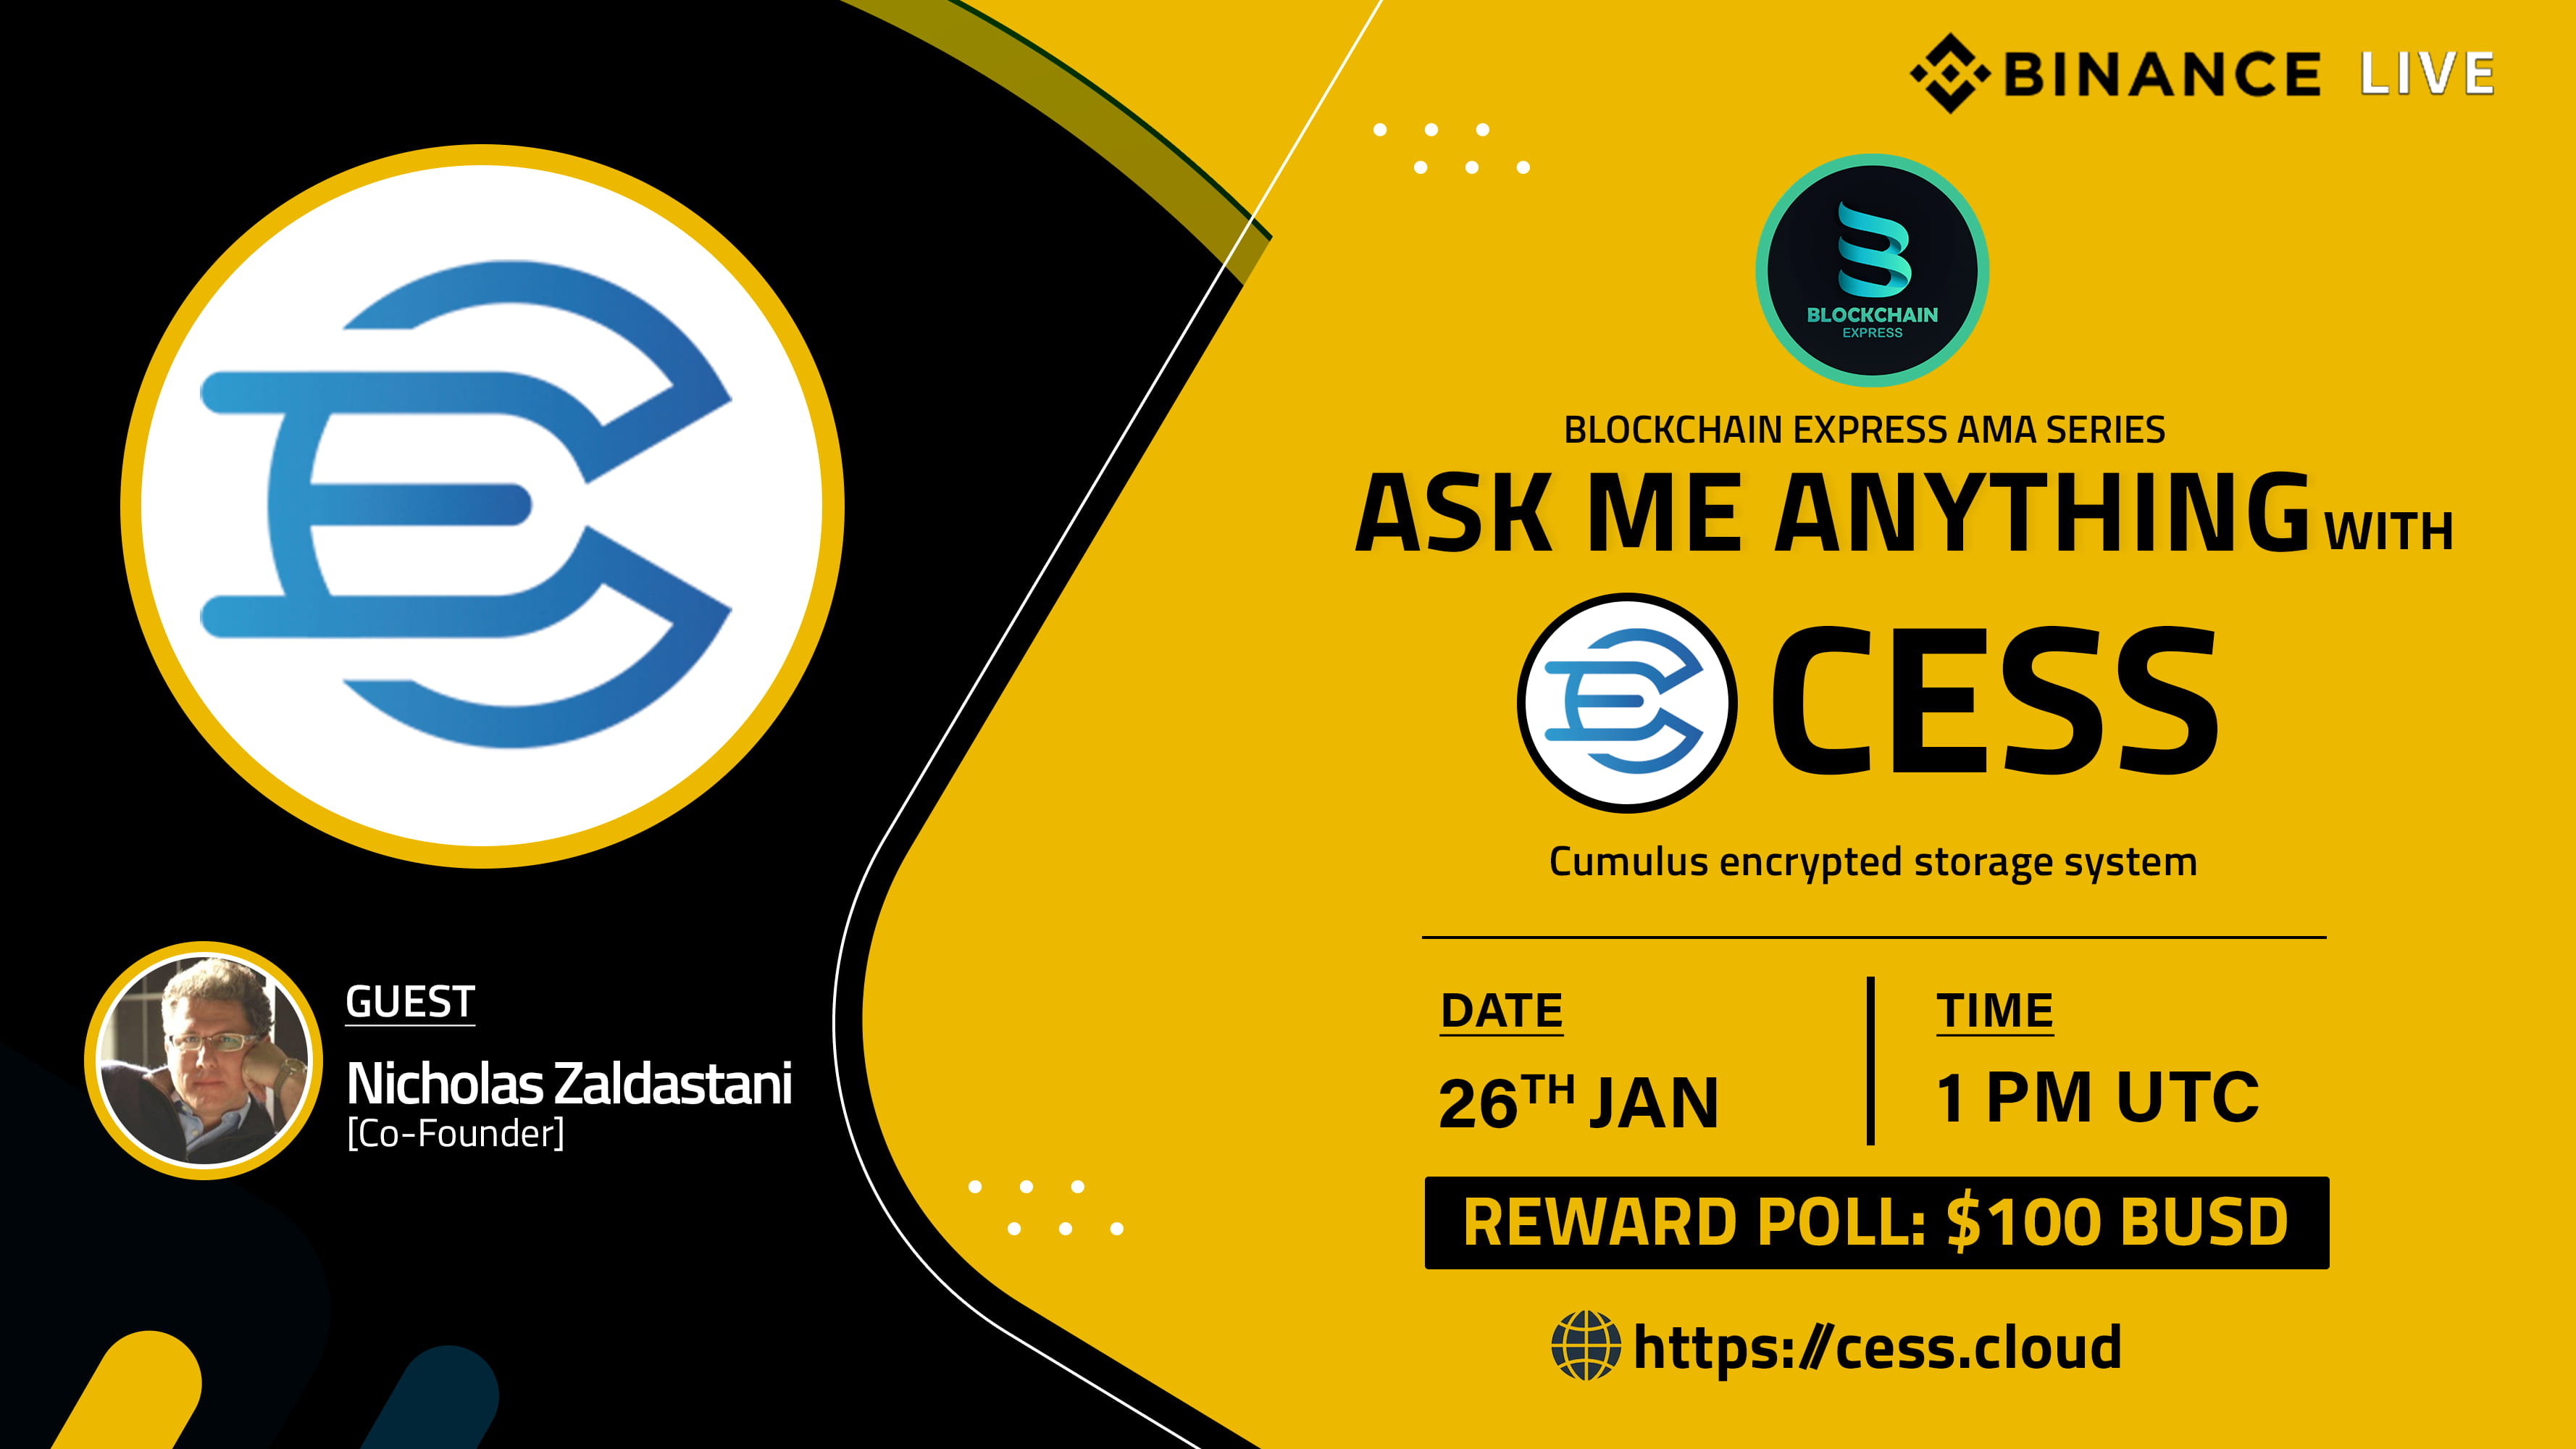 ₿lockchain Express will hosting an ASK ME ANYTHING session with" CESS "